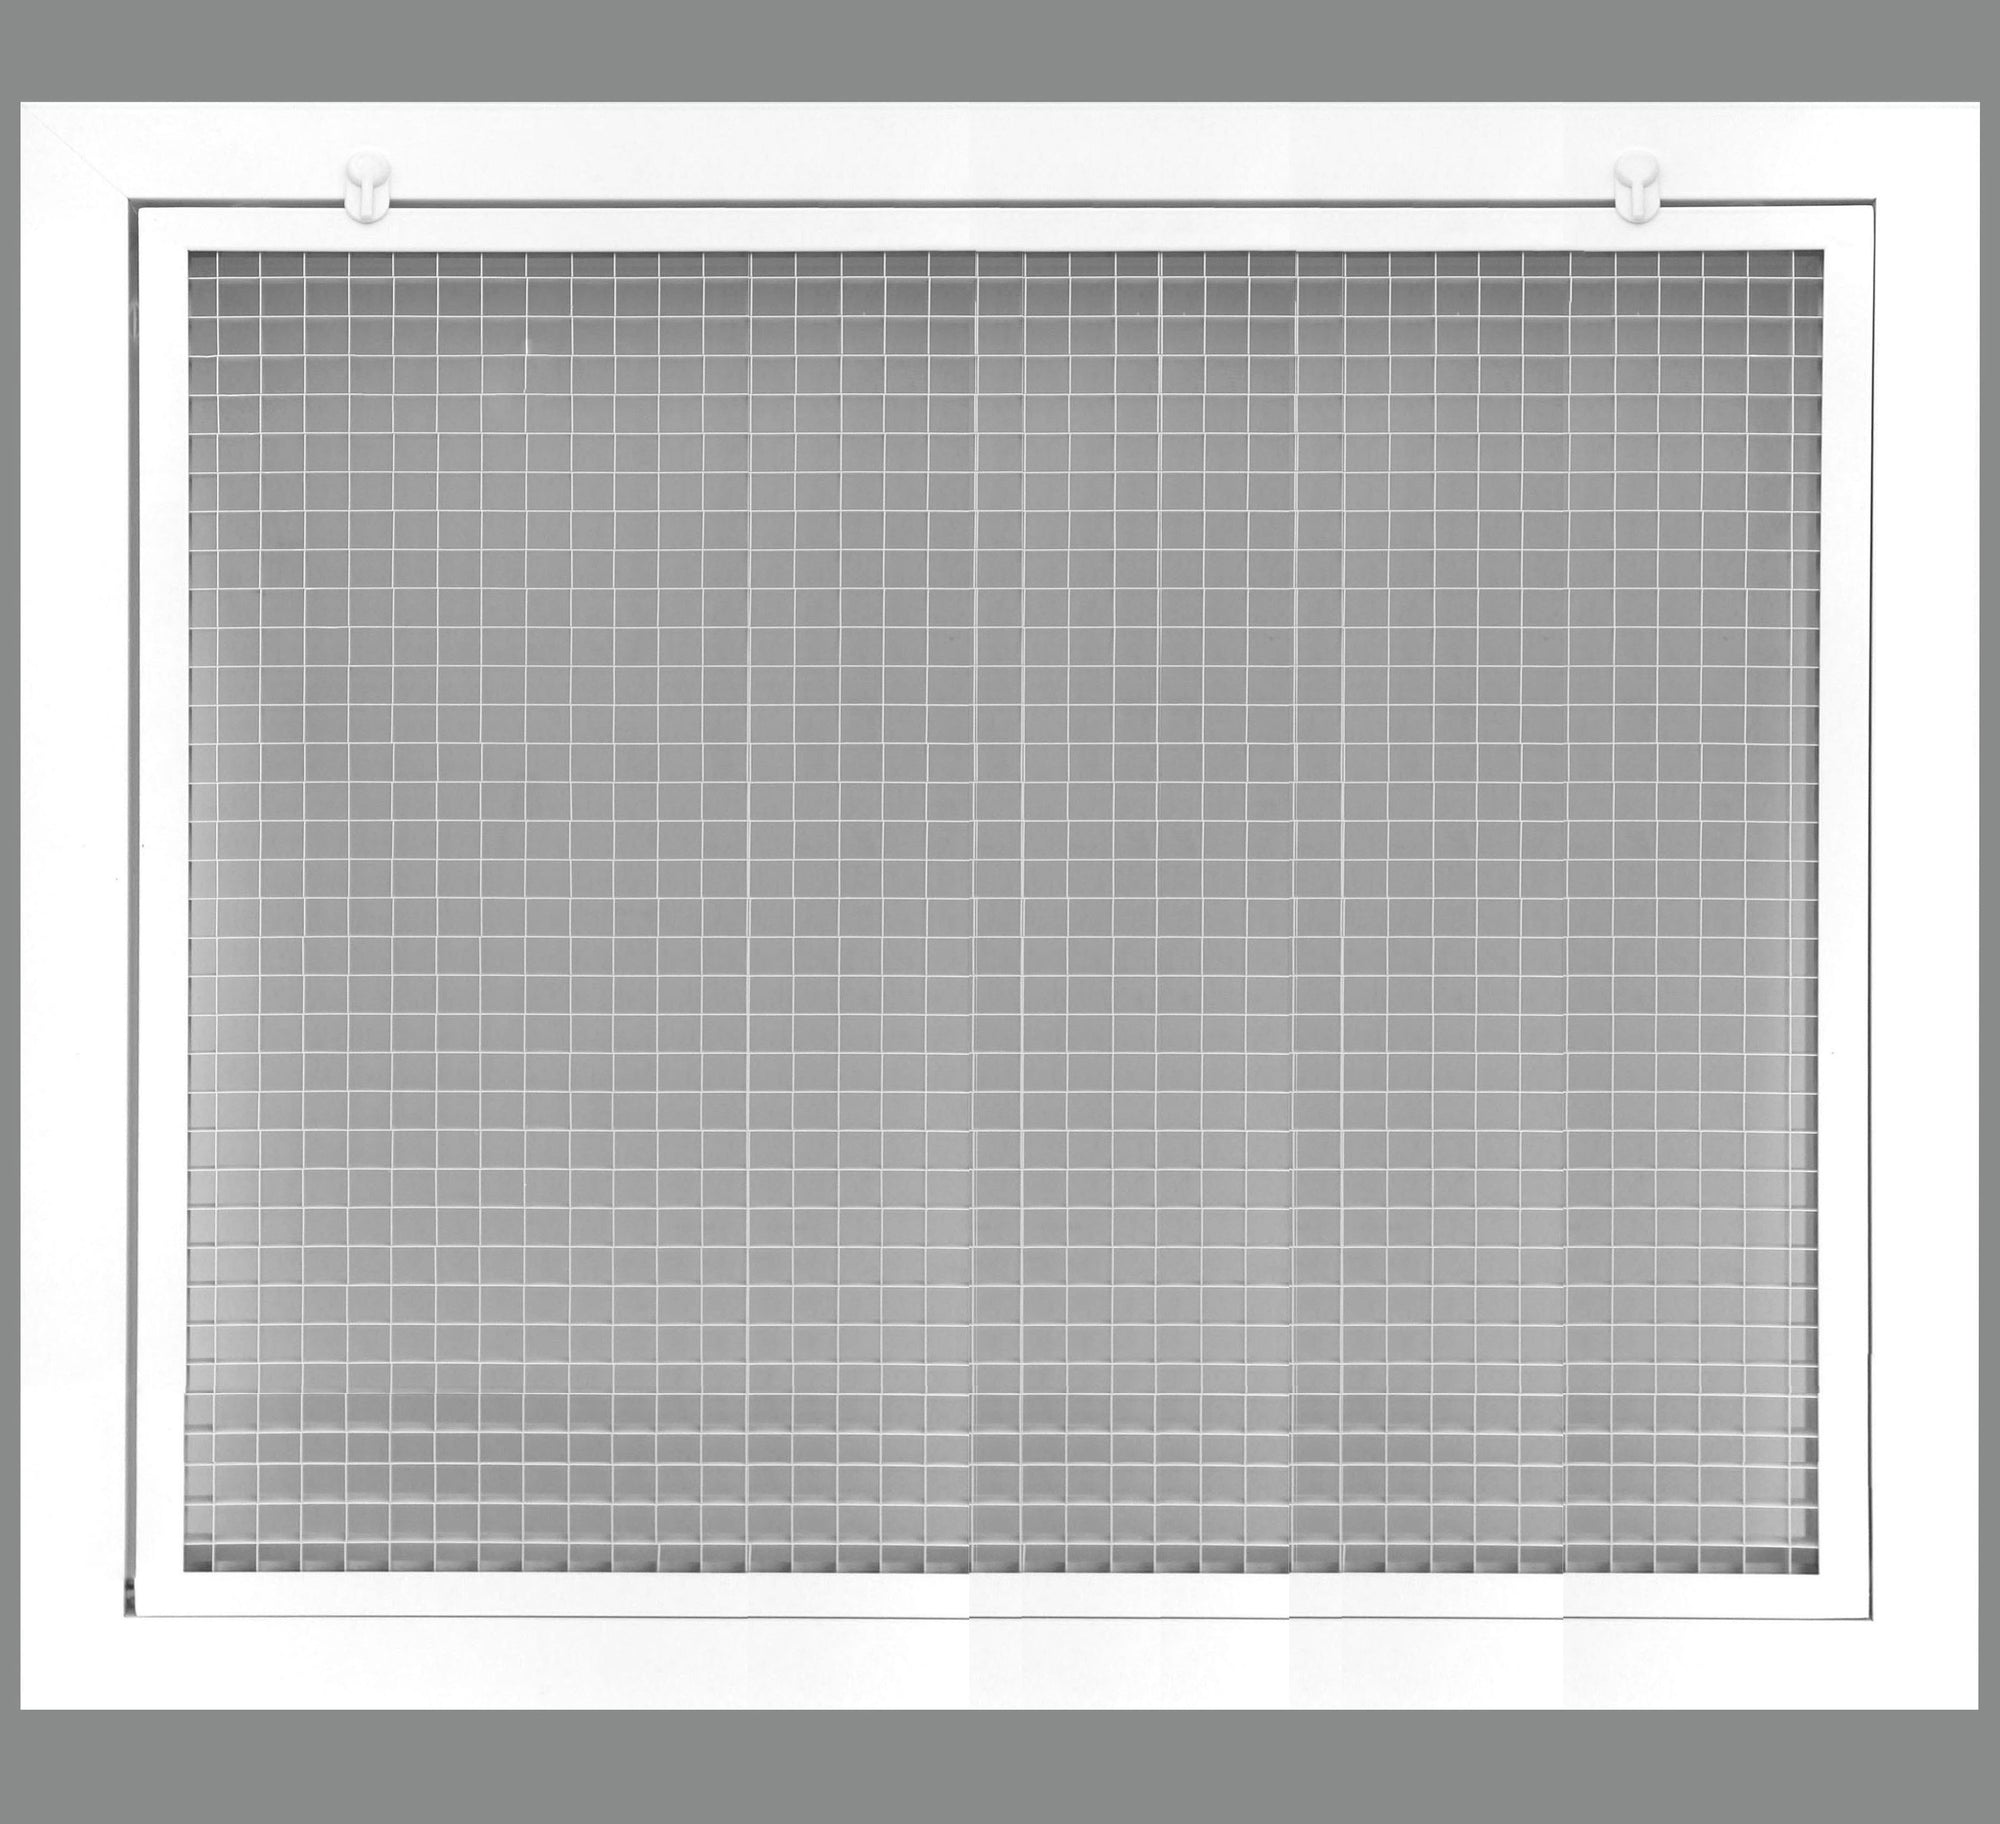 28" x 26" Cube Core Eggcrate Return Air Filter Grille for 1" Filter